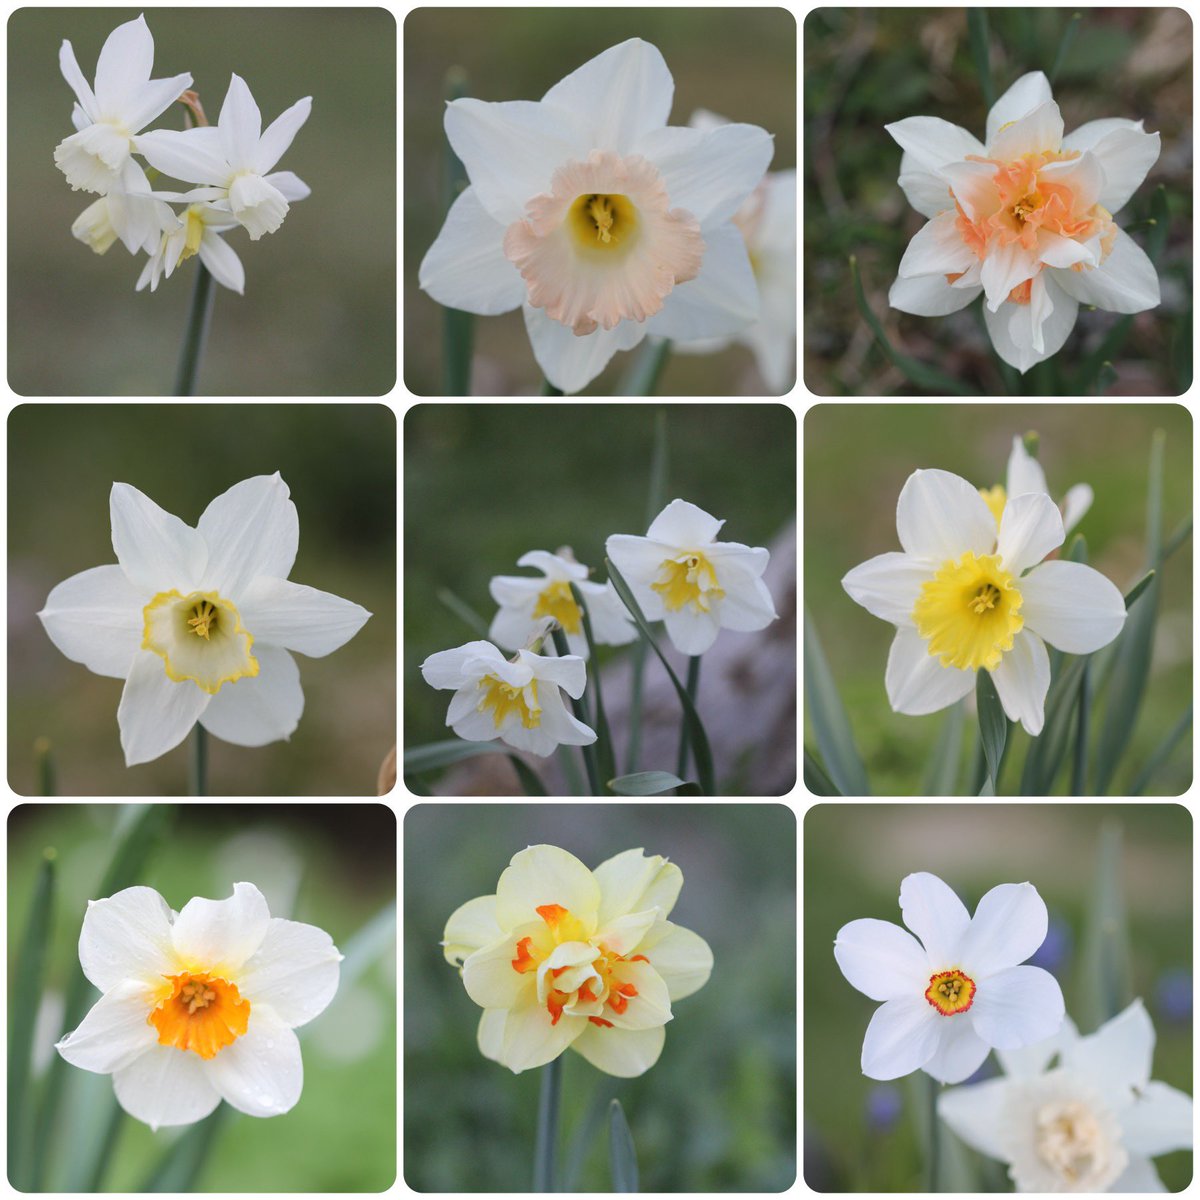 Some more Daffodils. I have a soft spot for them.

#daffodils #narcissus #GardenersWorld #GardeningX